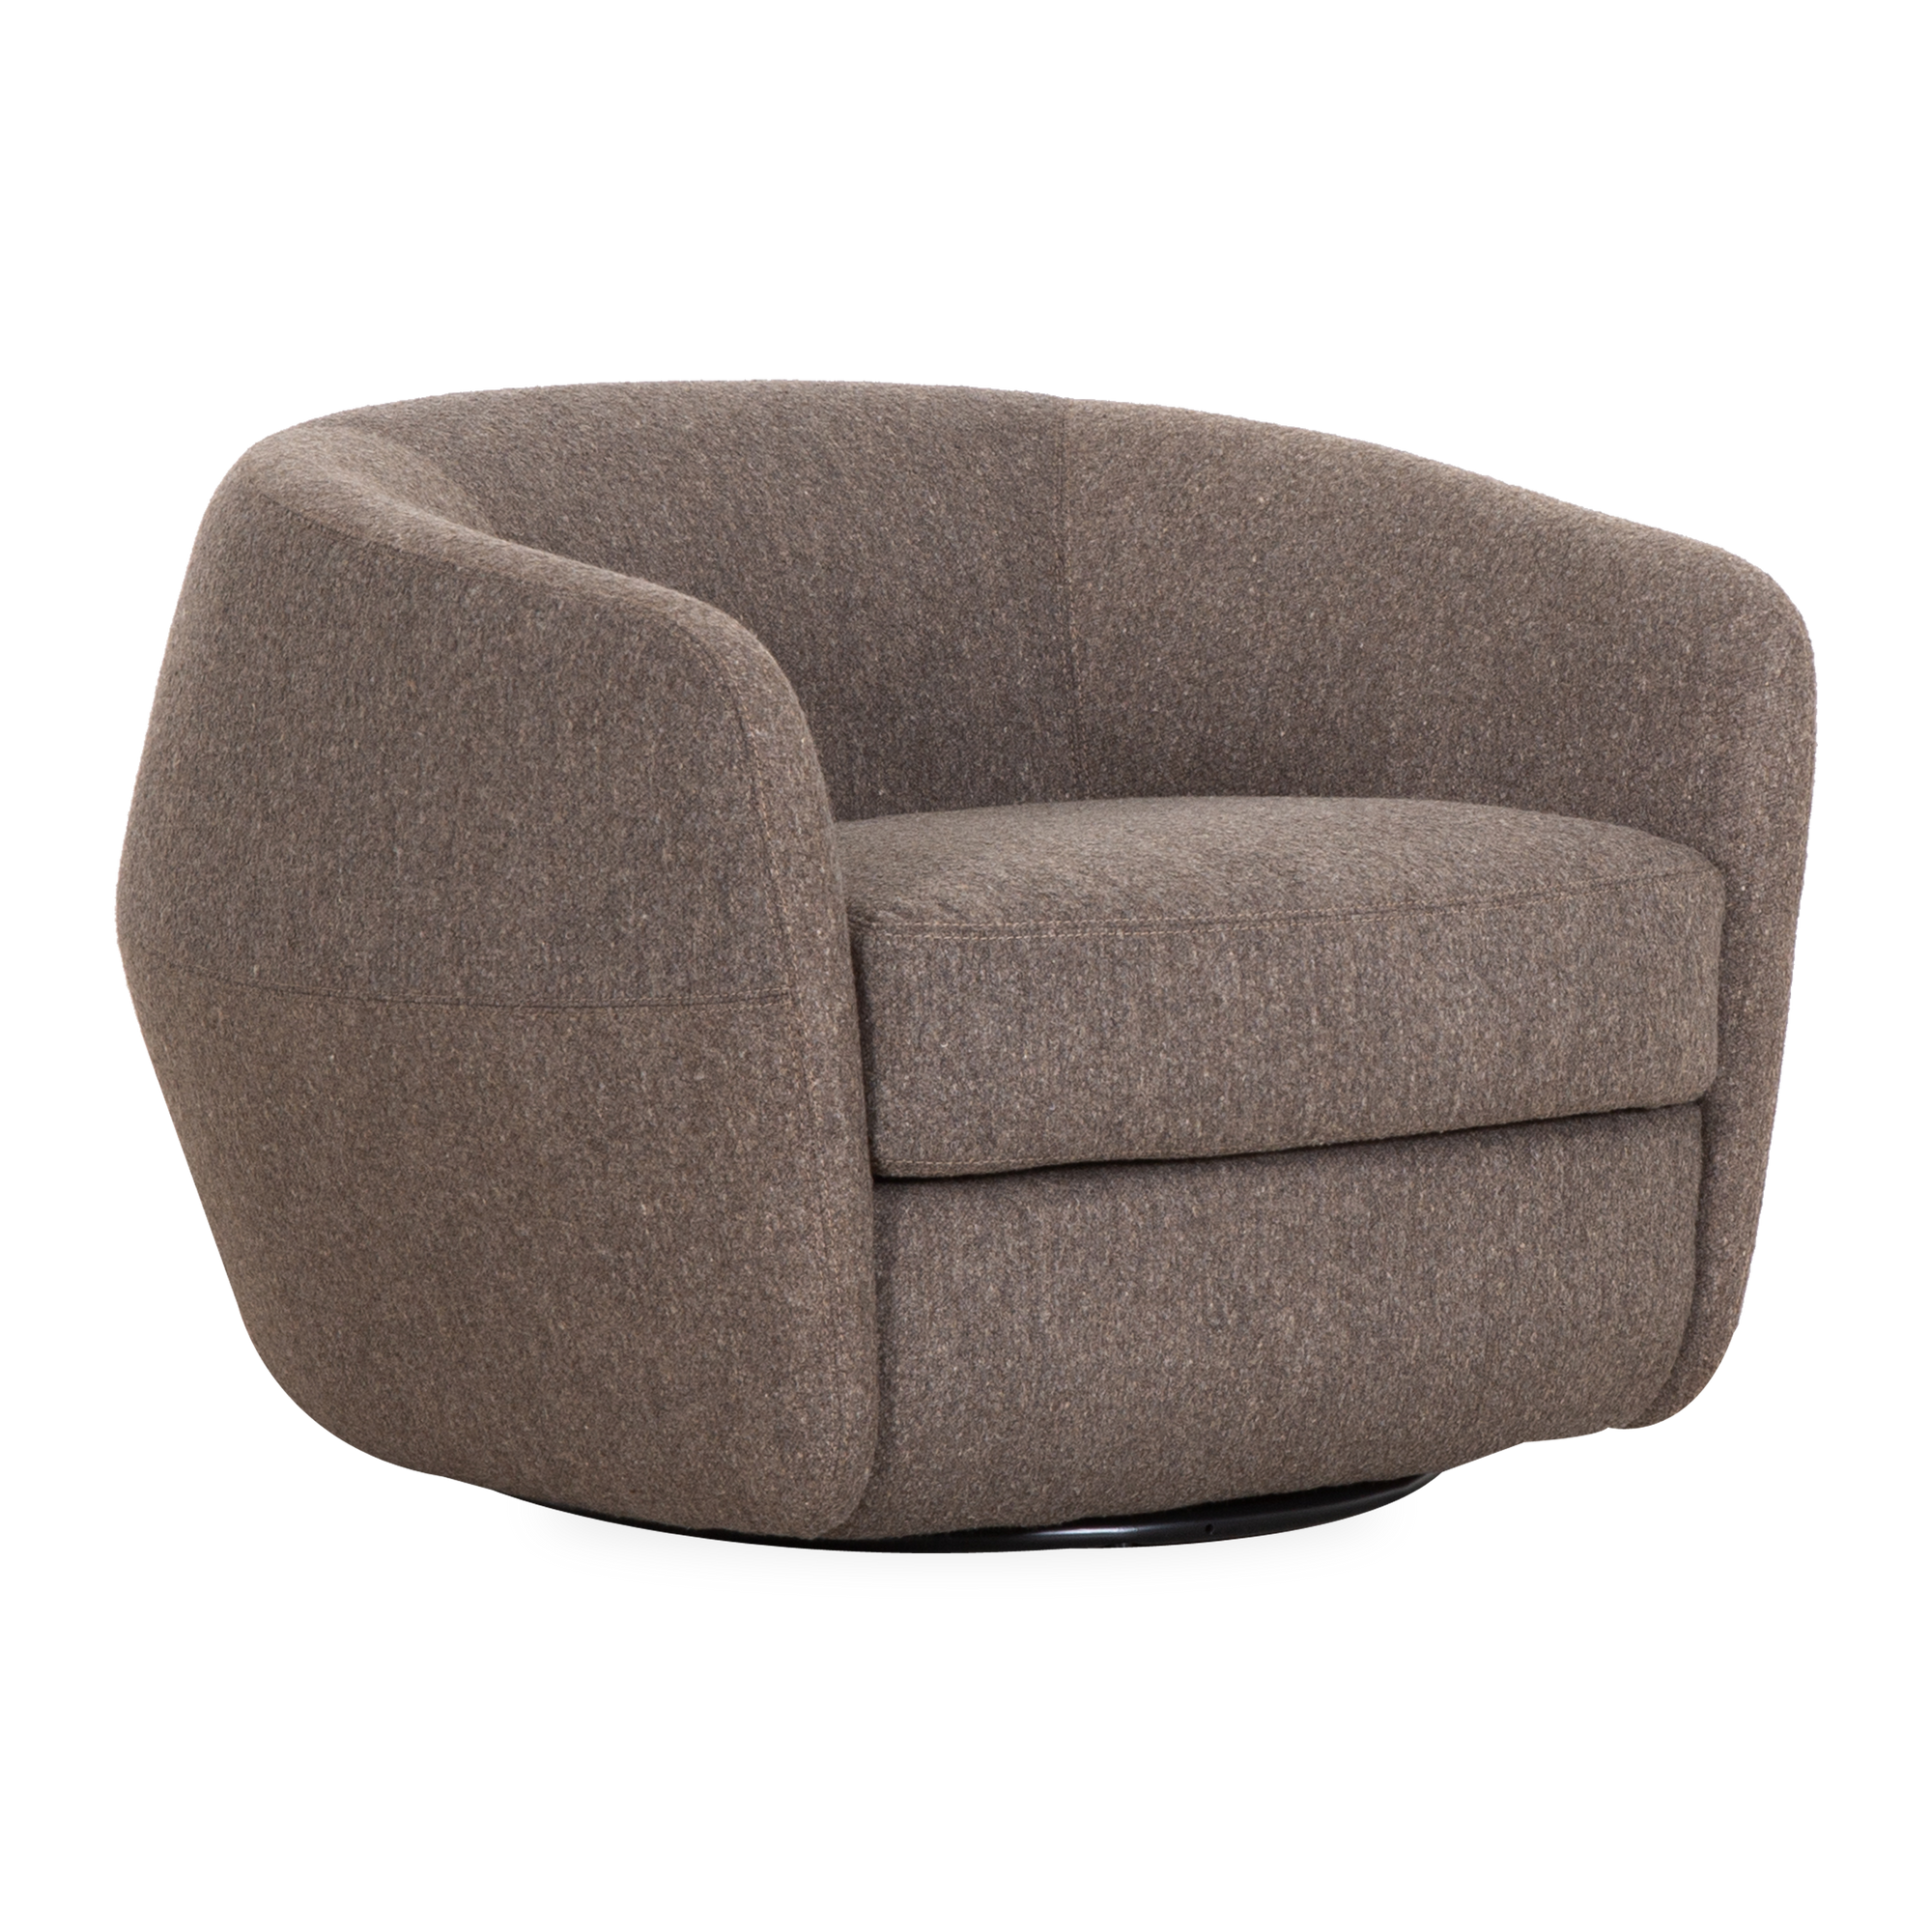 Stylish and comfortable, the Berger Swivel Chair is where comfort meets refined style.